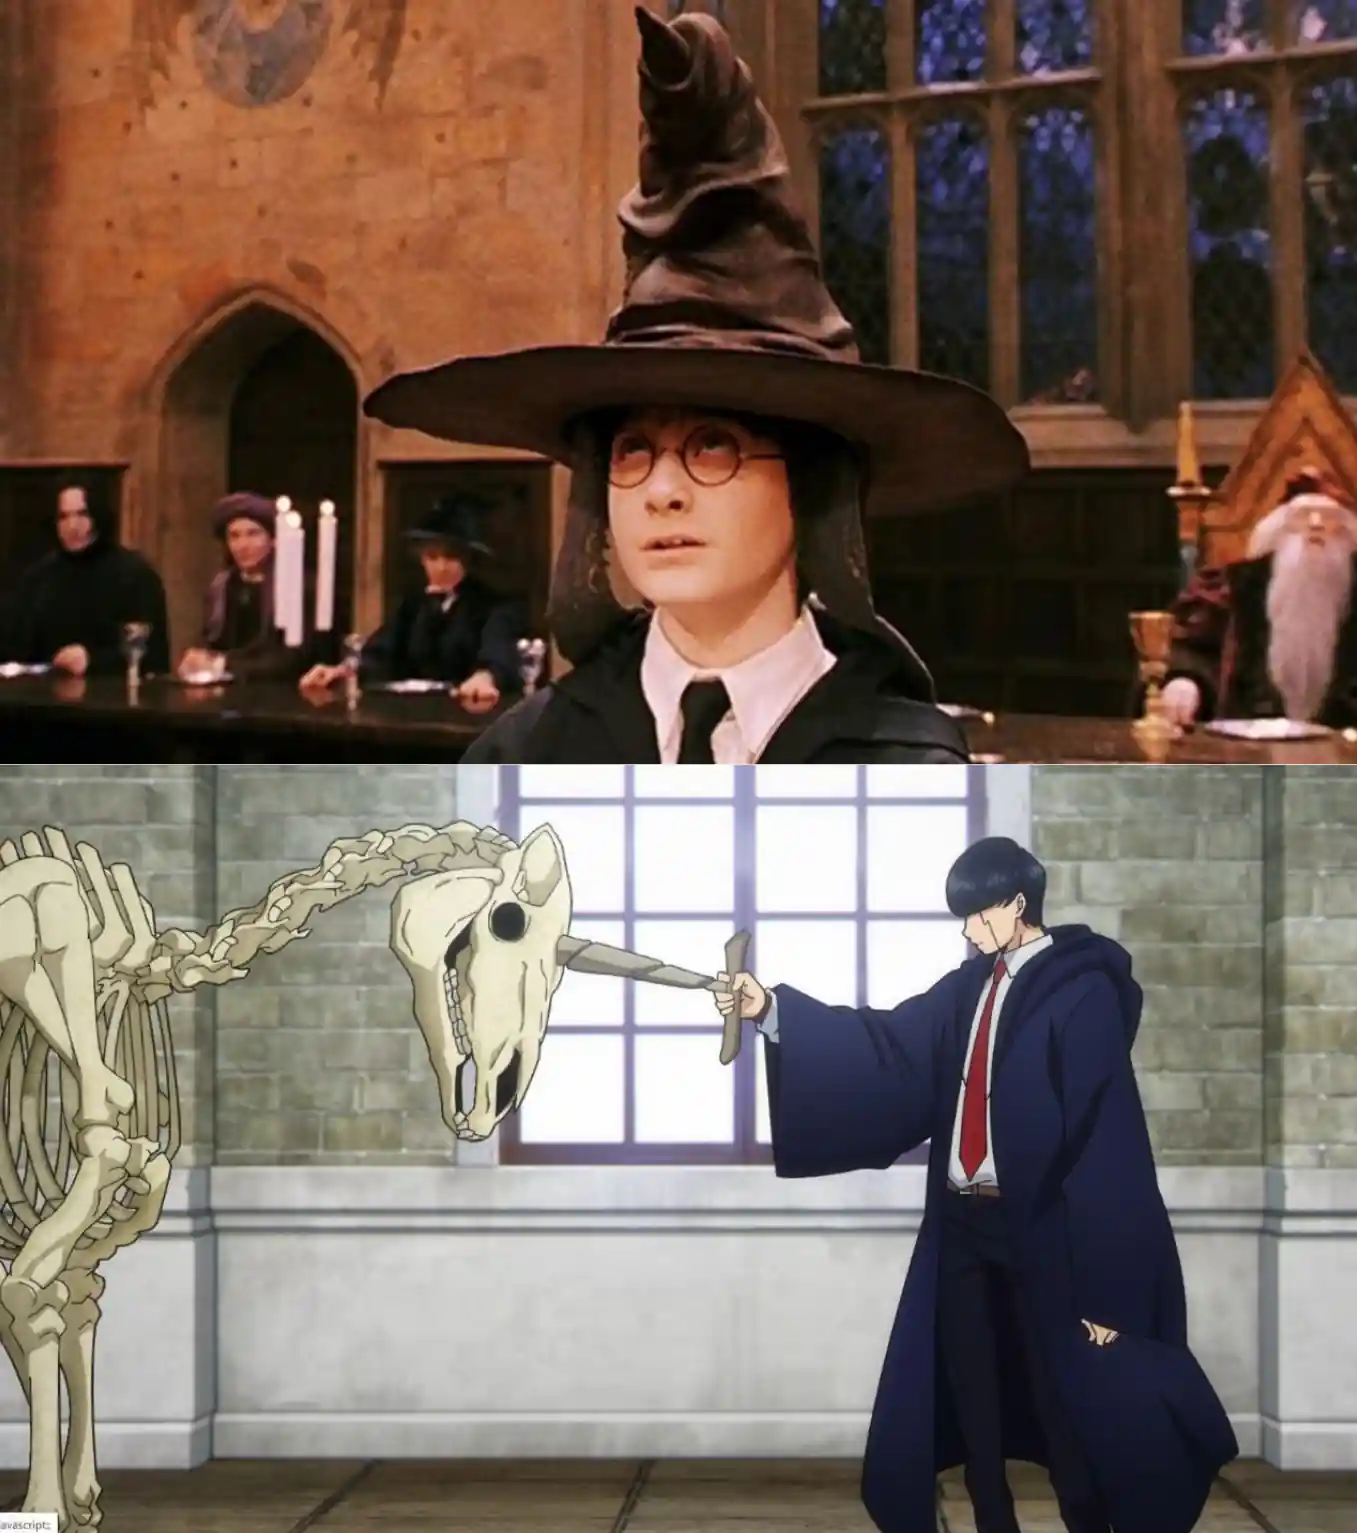 Similarities between Mashle and Harry Potter